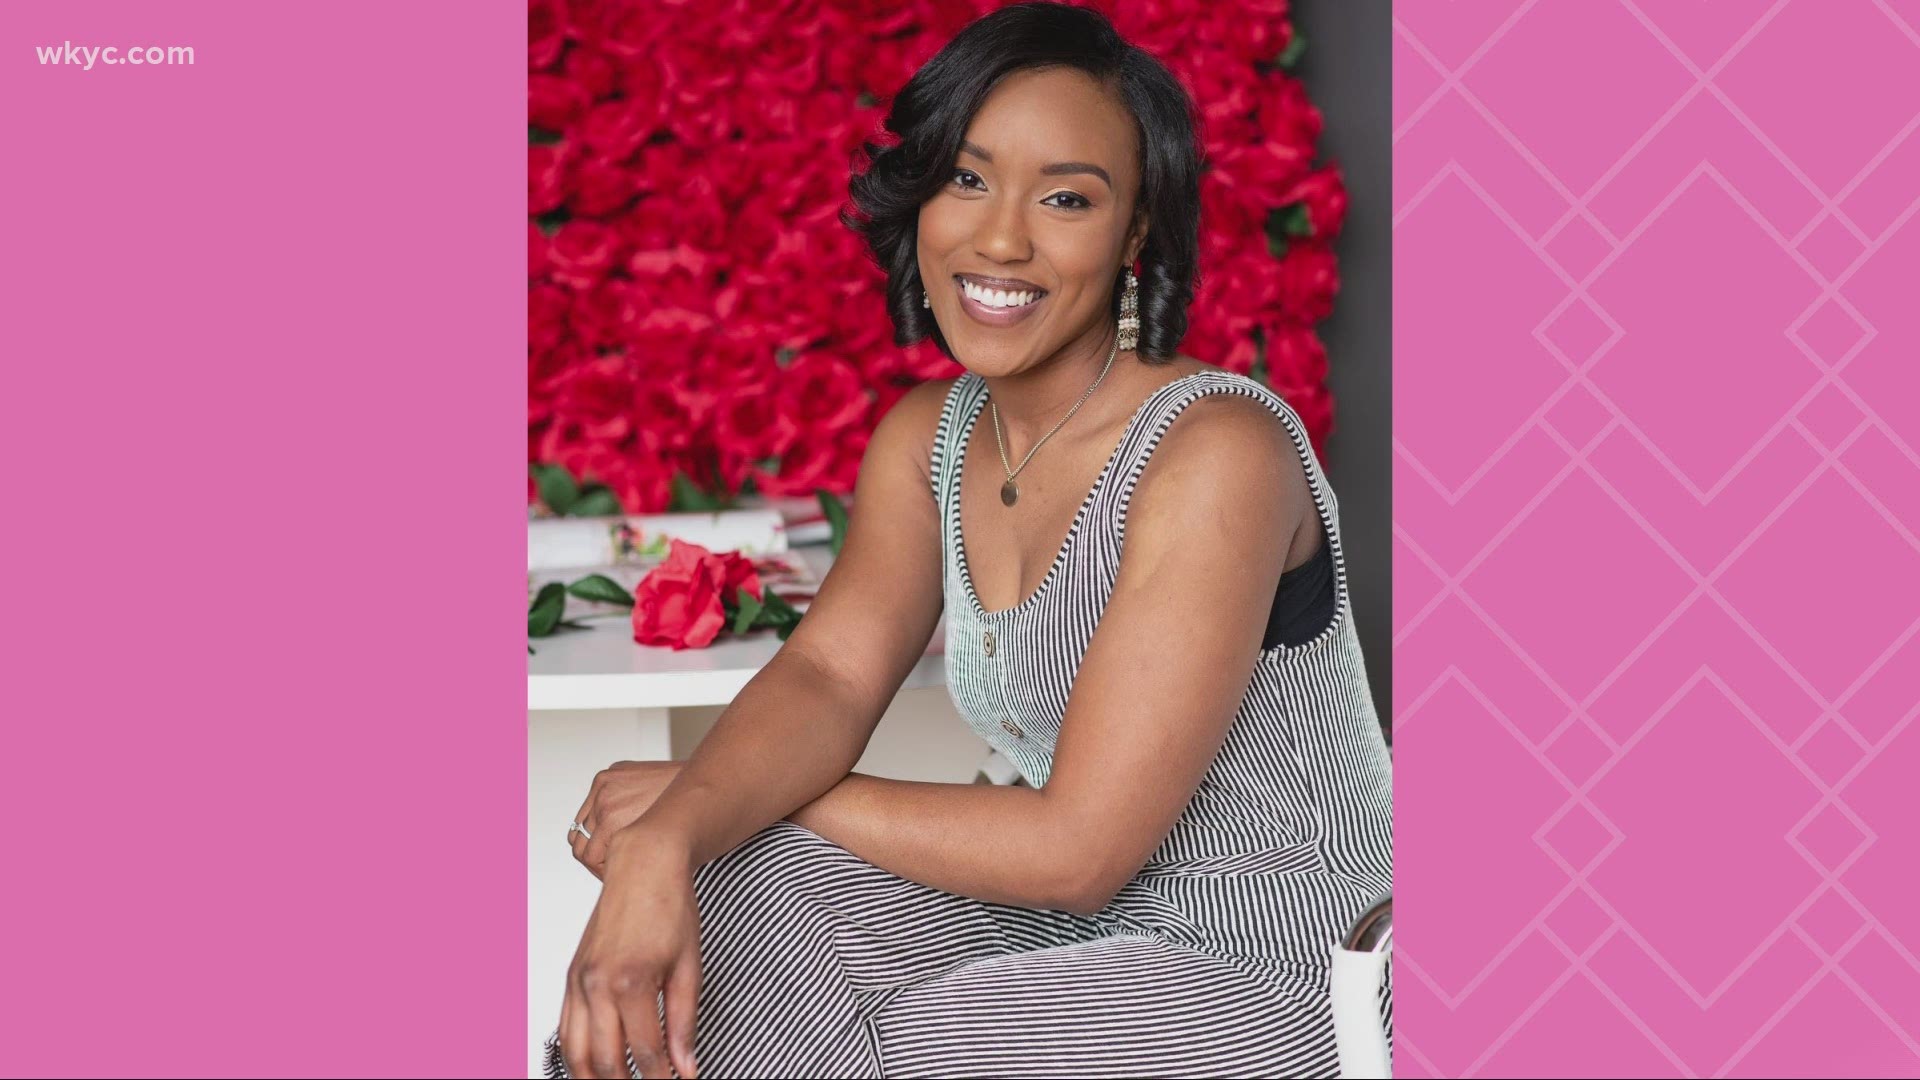 A local bride turned her craft into a six figure business. Kierra Cotton introduces us to Denisha Anderson, the owner of Cleveland Flower Walls.